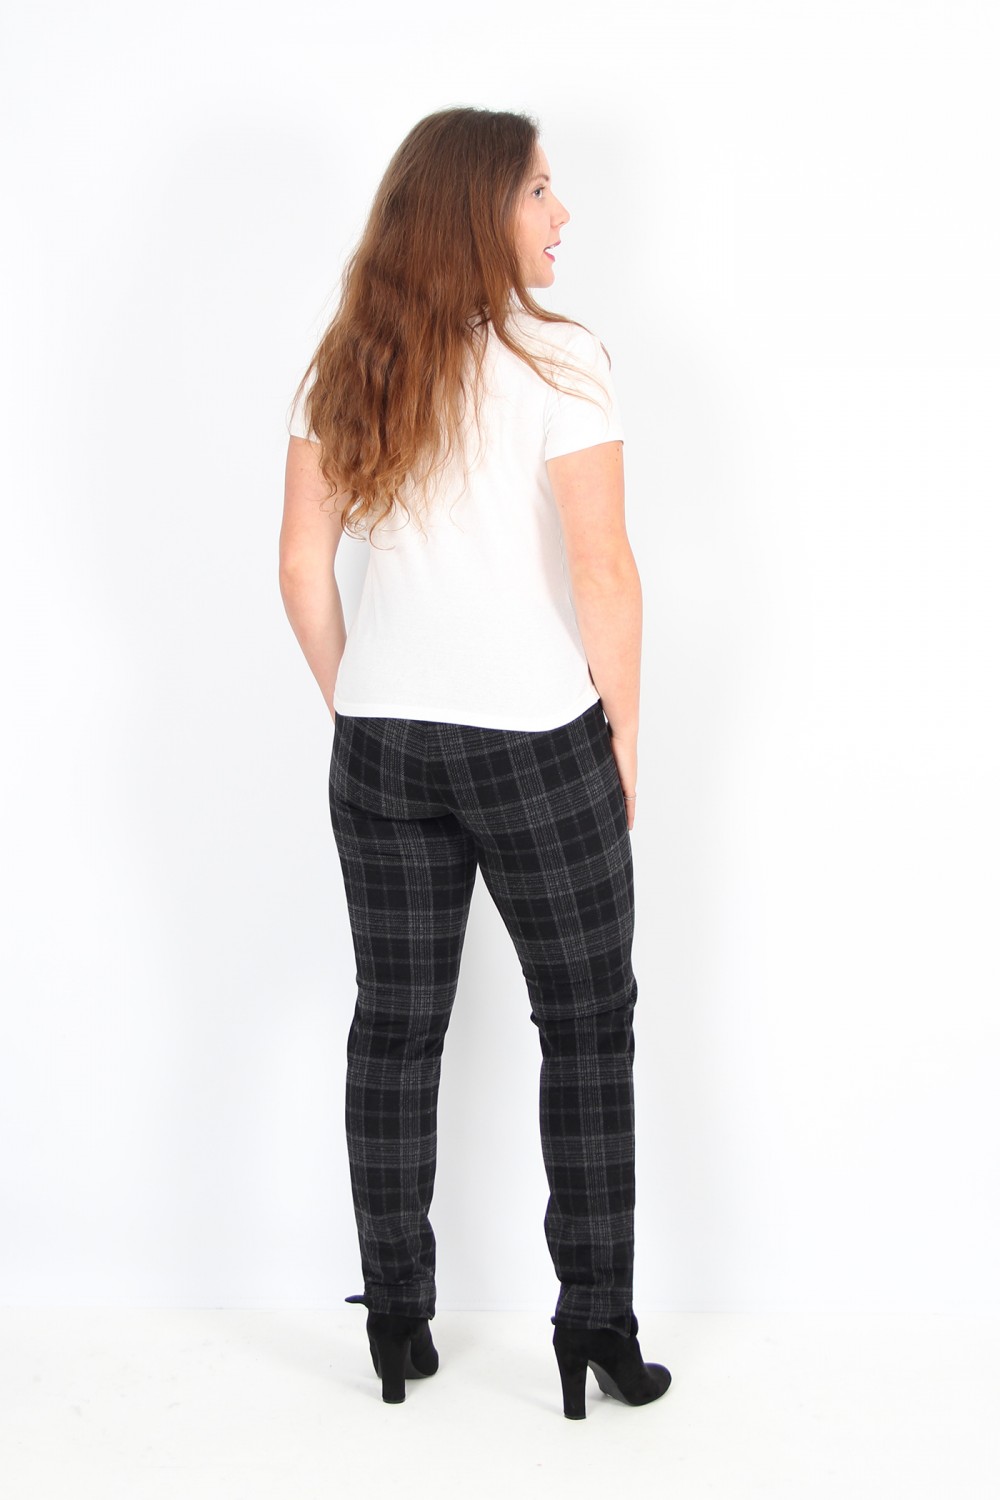 Robell Trousers Rose Limited Addition Plaid Check Black